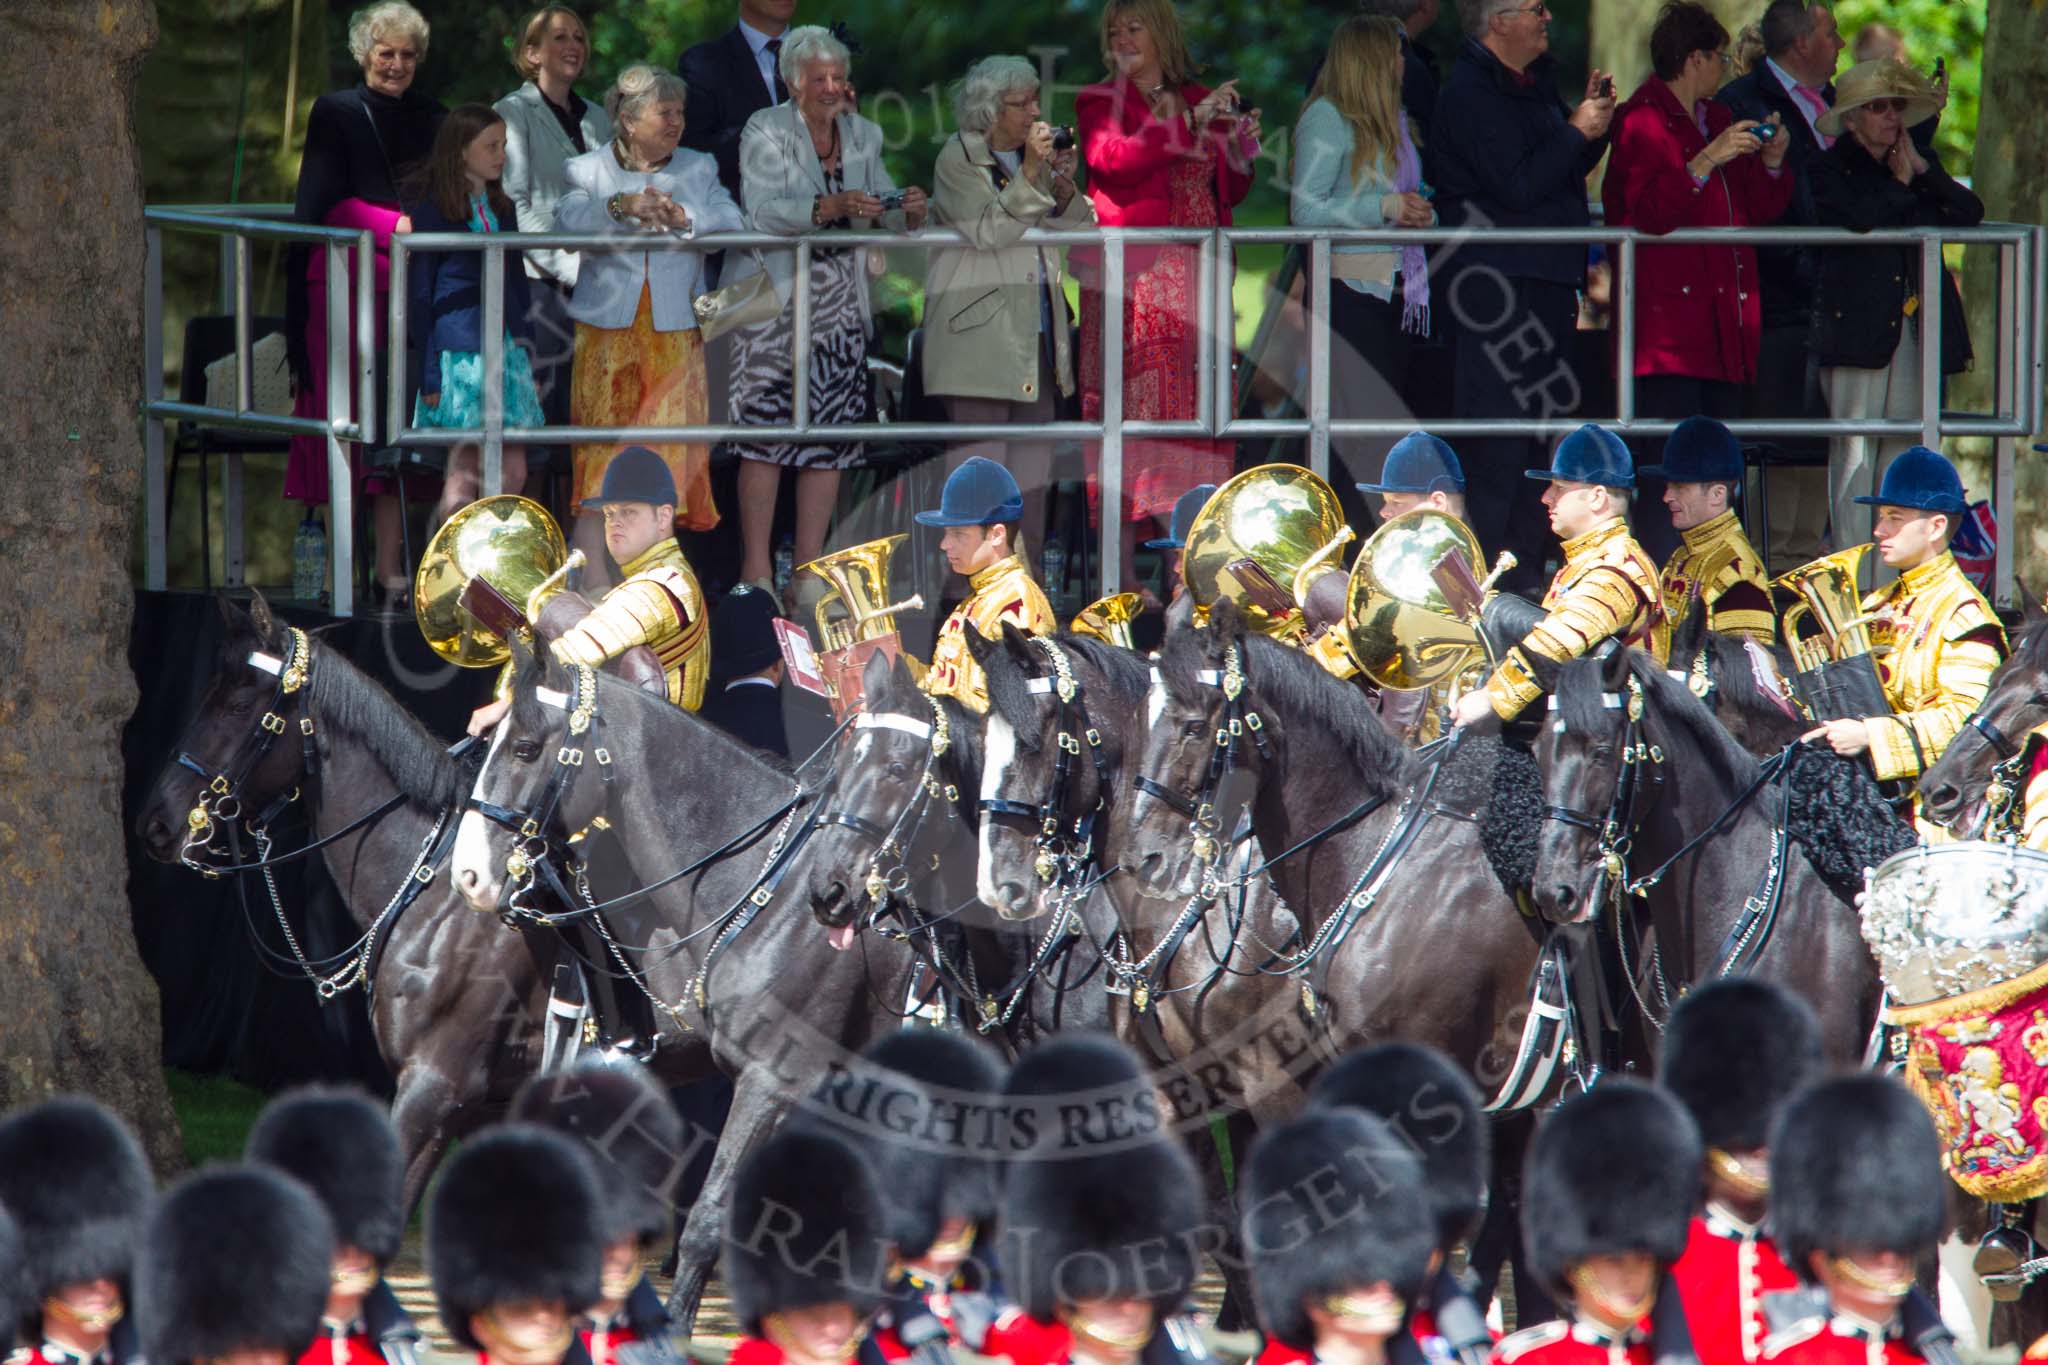 Trooping the Colour 2013: The Mounted Bands of the Household Cavalry are marching down Horse Guards Road as the third element of the Royal Procession, taking position at the northern side of Horse Guards Parade, next to St James's Park. Image #242, 15 June 2013 10:57 Horse Guards Parade, London, UK